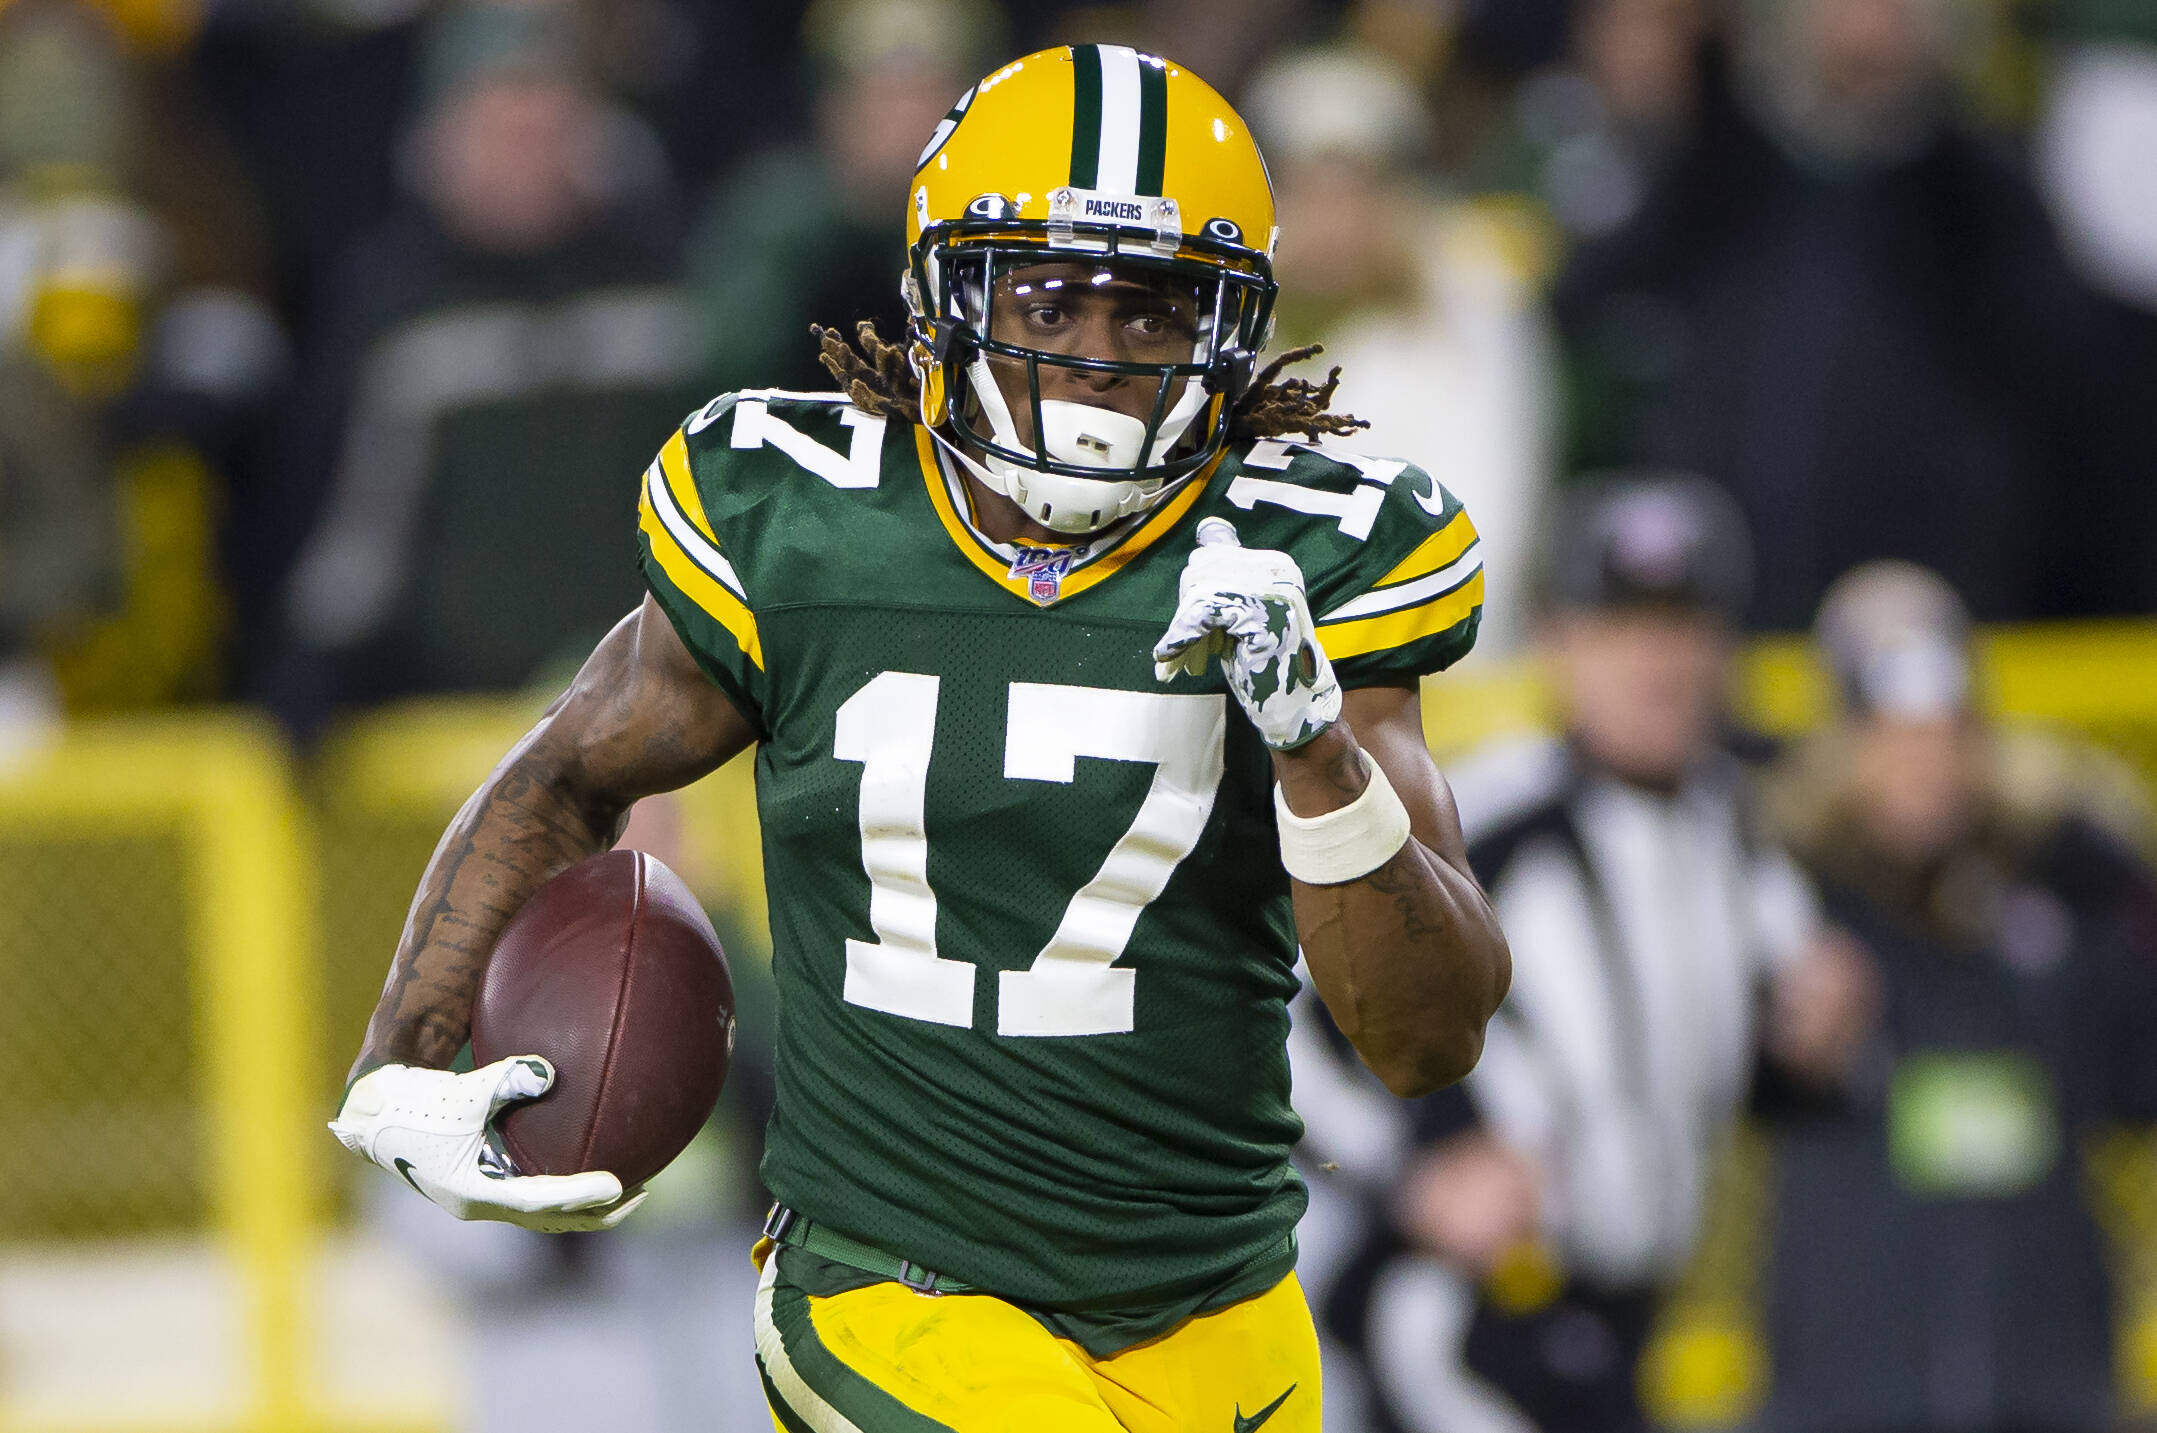 January 12, 2020: Green Bay Packers wide receiver Davante Adams 17 runs into the end zone after making a 40 yard touchdo